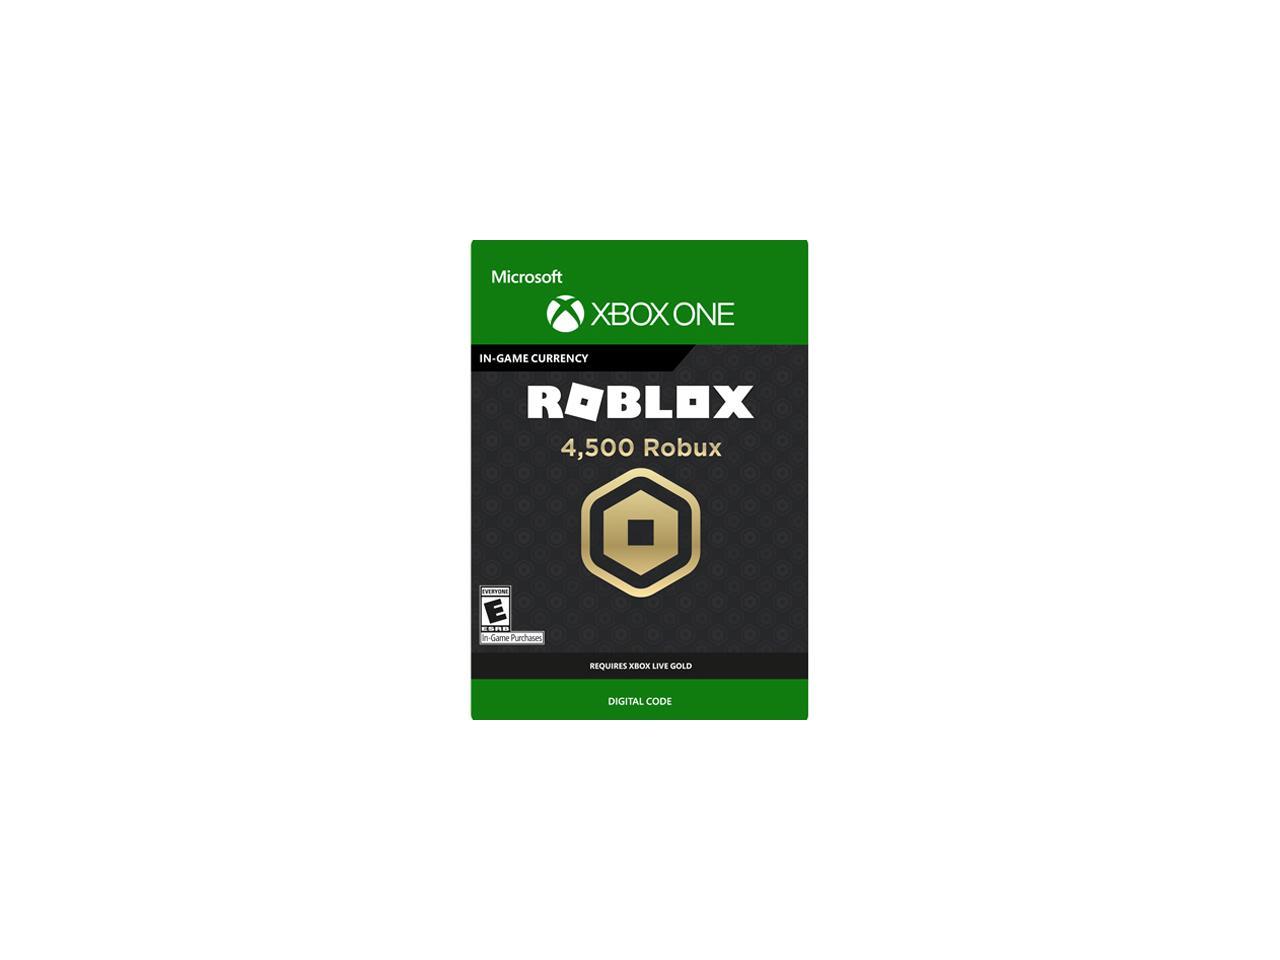 4 500 Robux For Xbox One Digital Code Newegg Com - how to get robux in xbox one in game